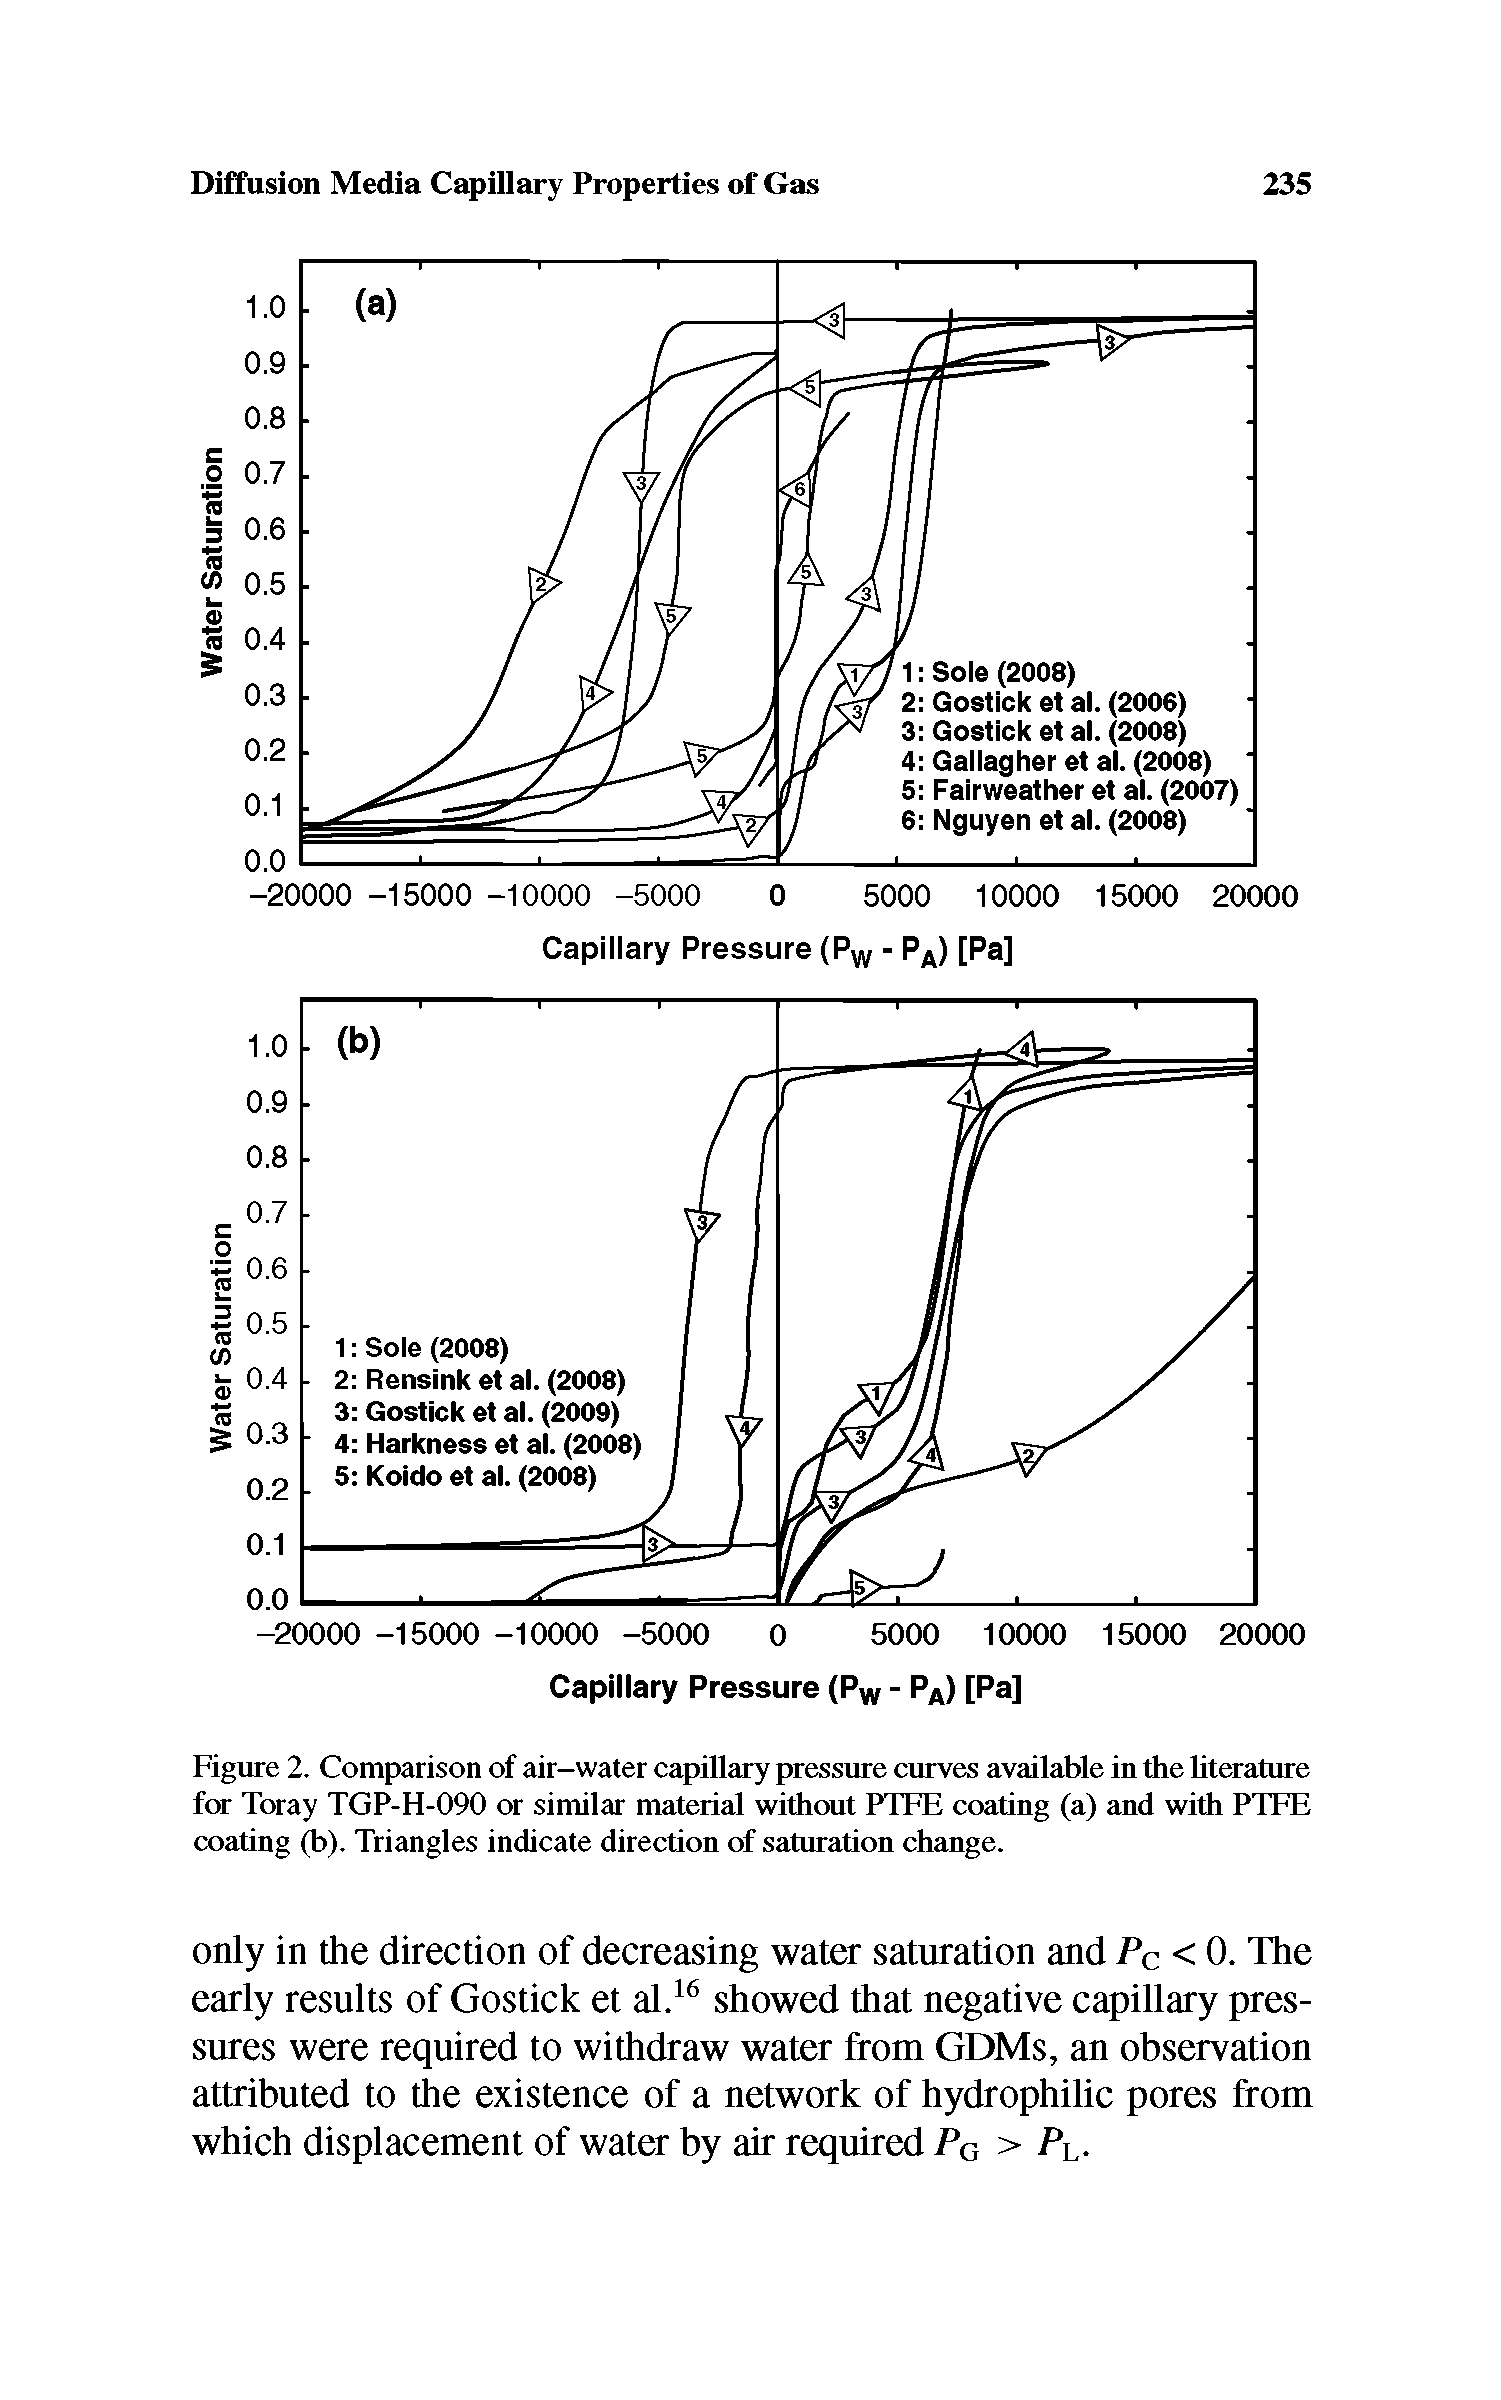 Figure 2. Comparison of air-water capillary pressure curves available in the literature for Toray TGP-H-090 or similar material without PTFE coating (a) and with PTFE coating (b). Triangles indicate direction of saturation change.